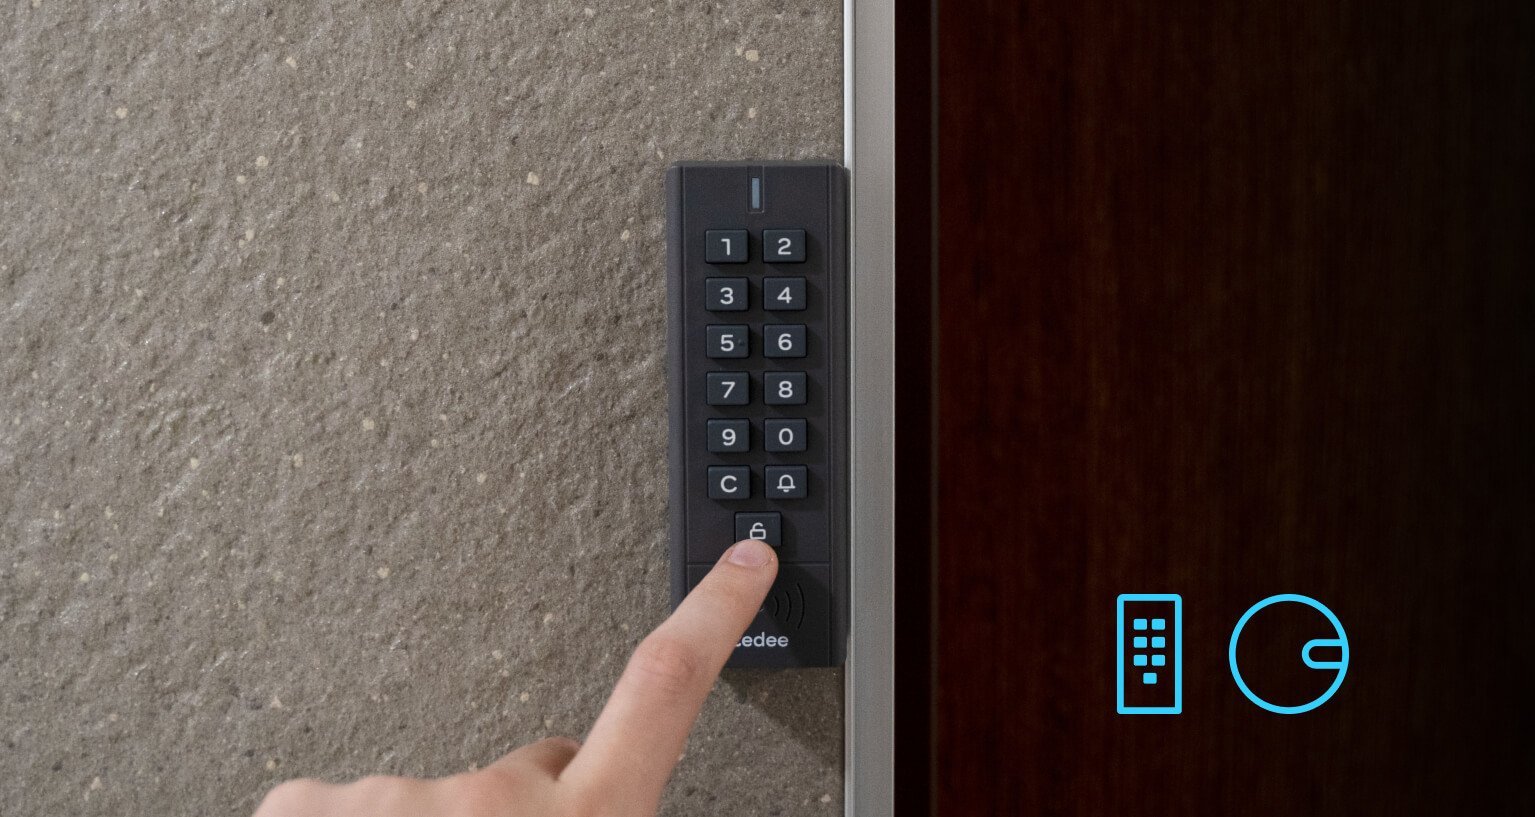 Entering the access code on the tedee keypad